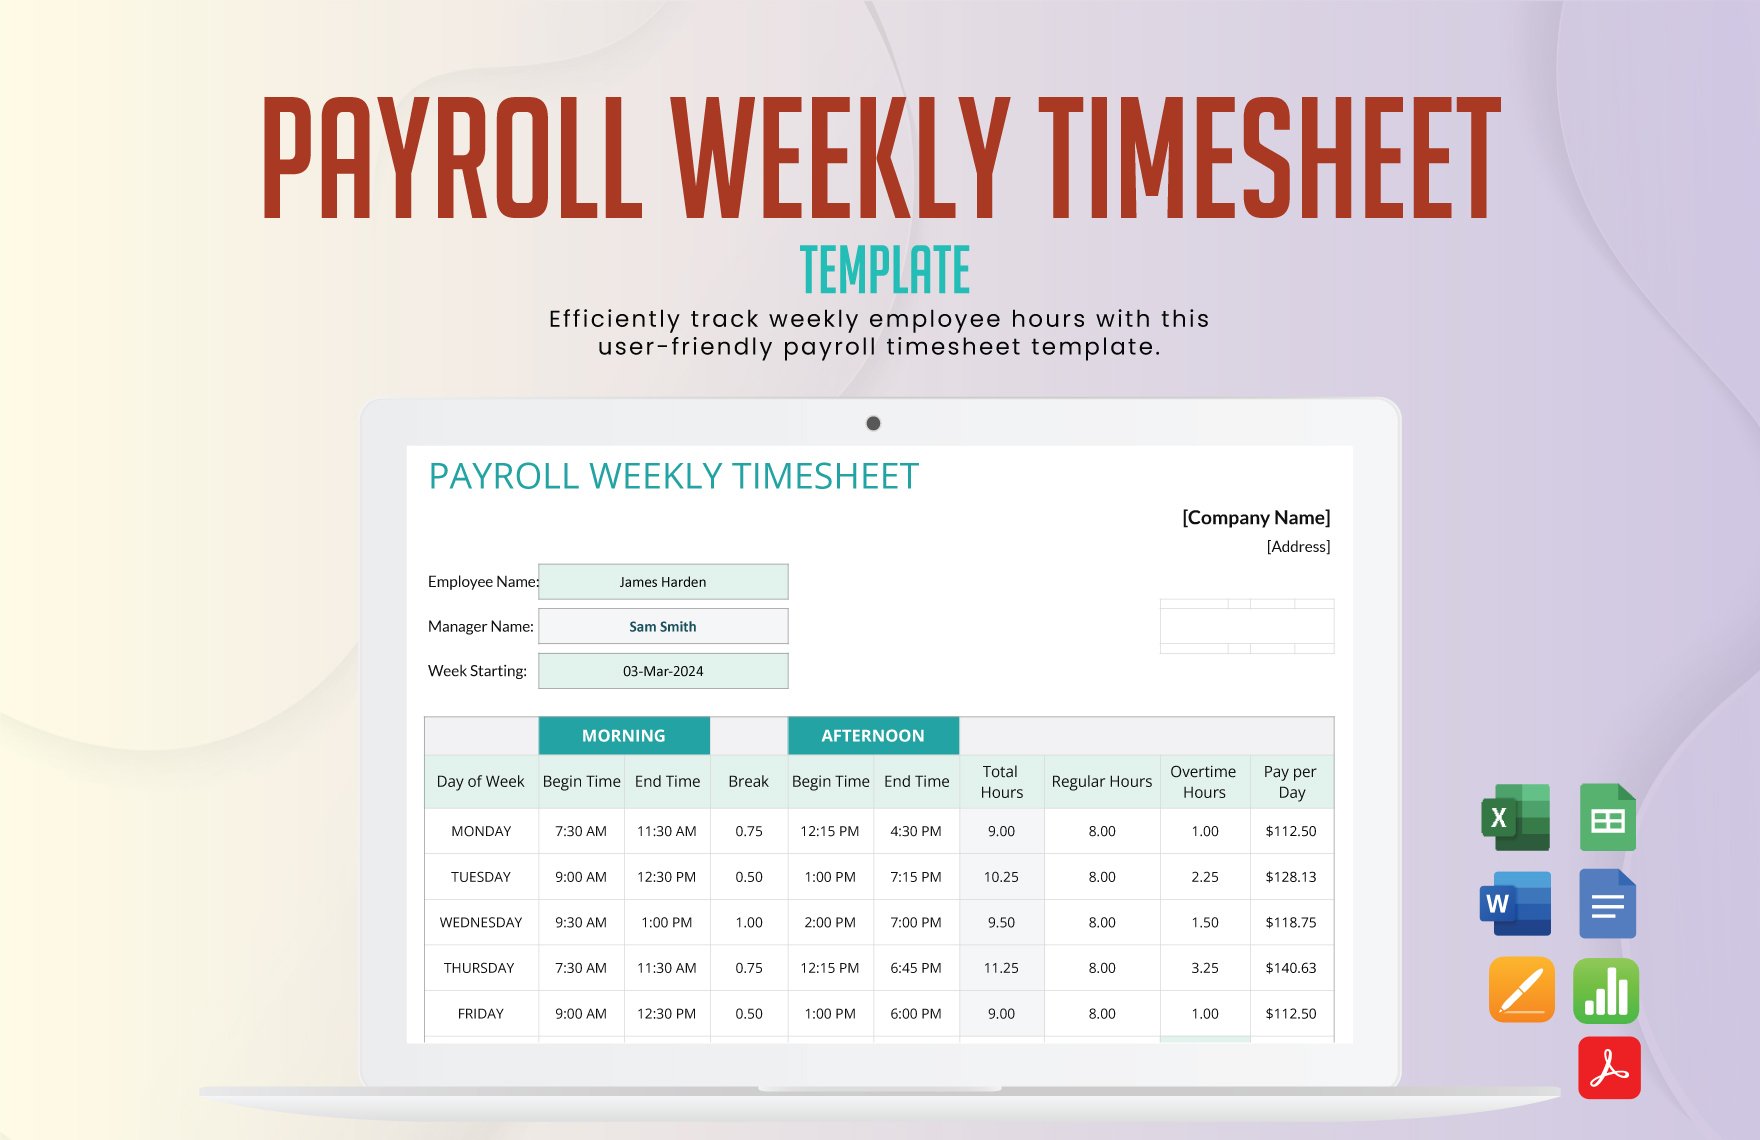 Payroll Weekly Timesheet Template in Word, Google Docs, Excel, PDF, Google Sheets, Apple Pages, Apple Numbers